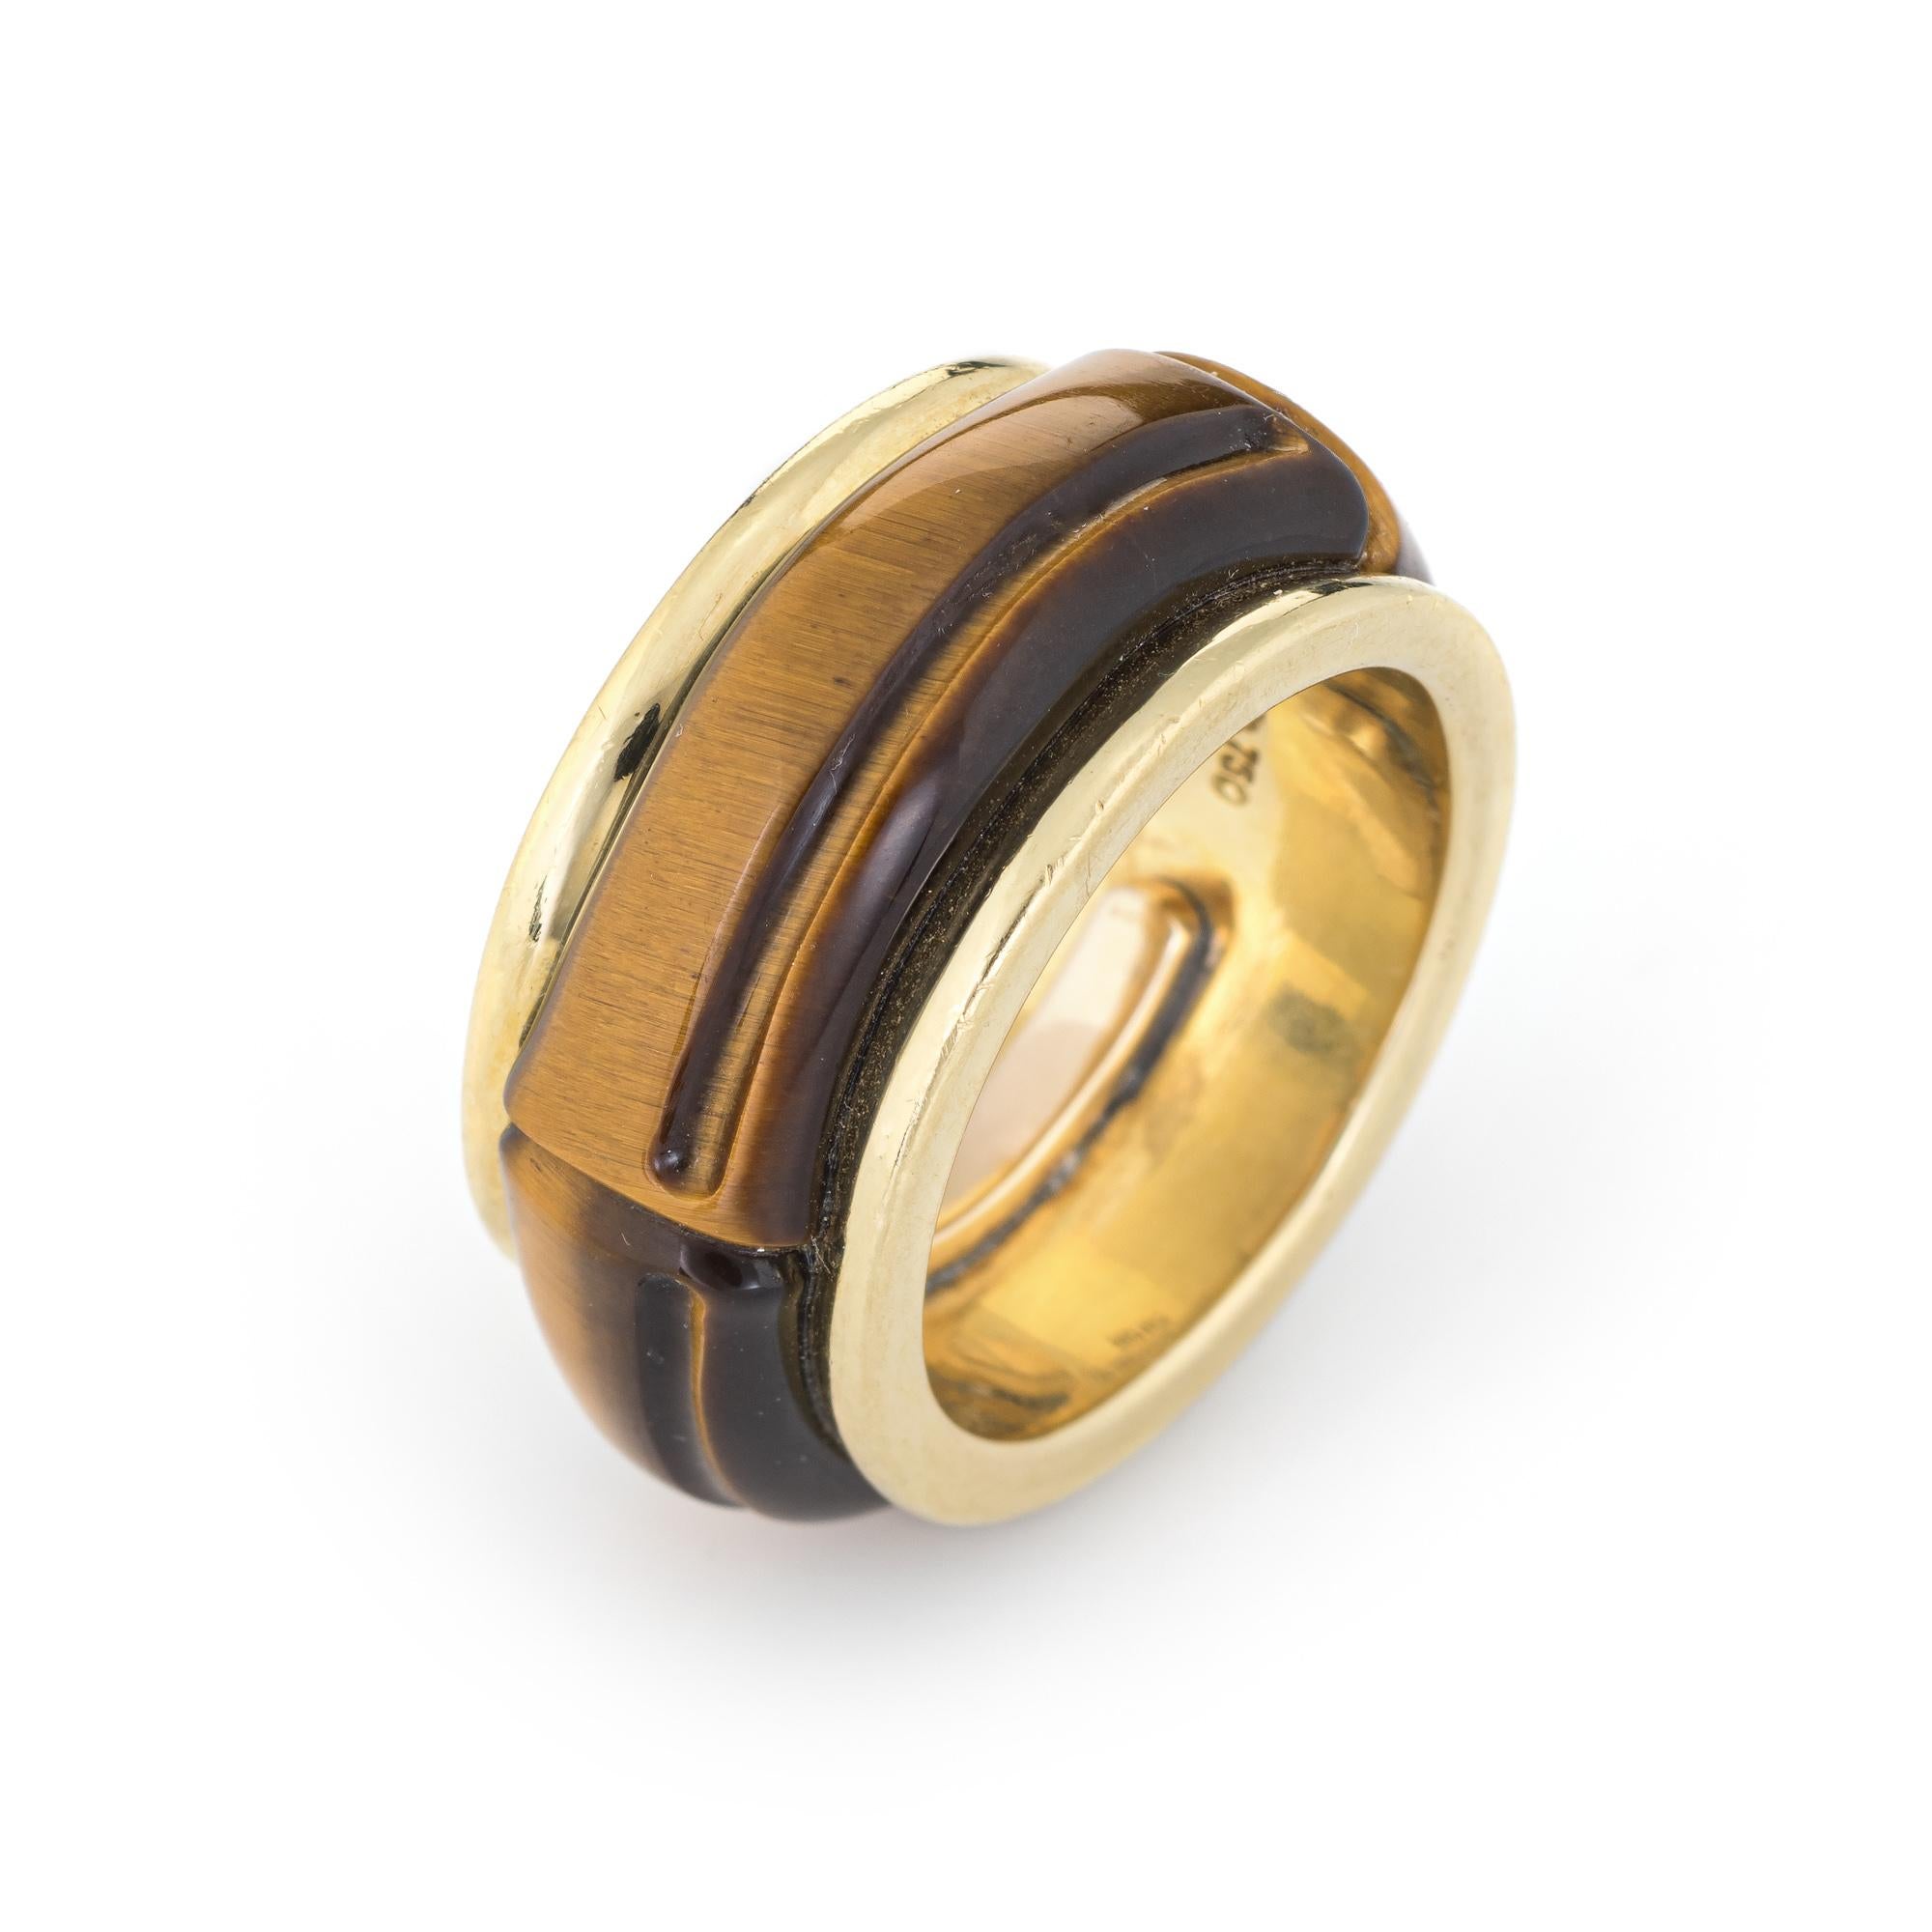 Finely detailed pre-owned Tiffany & Co tigers eye band, crafted in 18 karat yellow gold. 

Tigers eye is carved in a bamboo design and measures 9mm wide. The tigers eye is in excellent condition and free of cracks or chips.    

The ring is designed